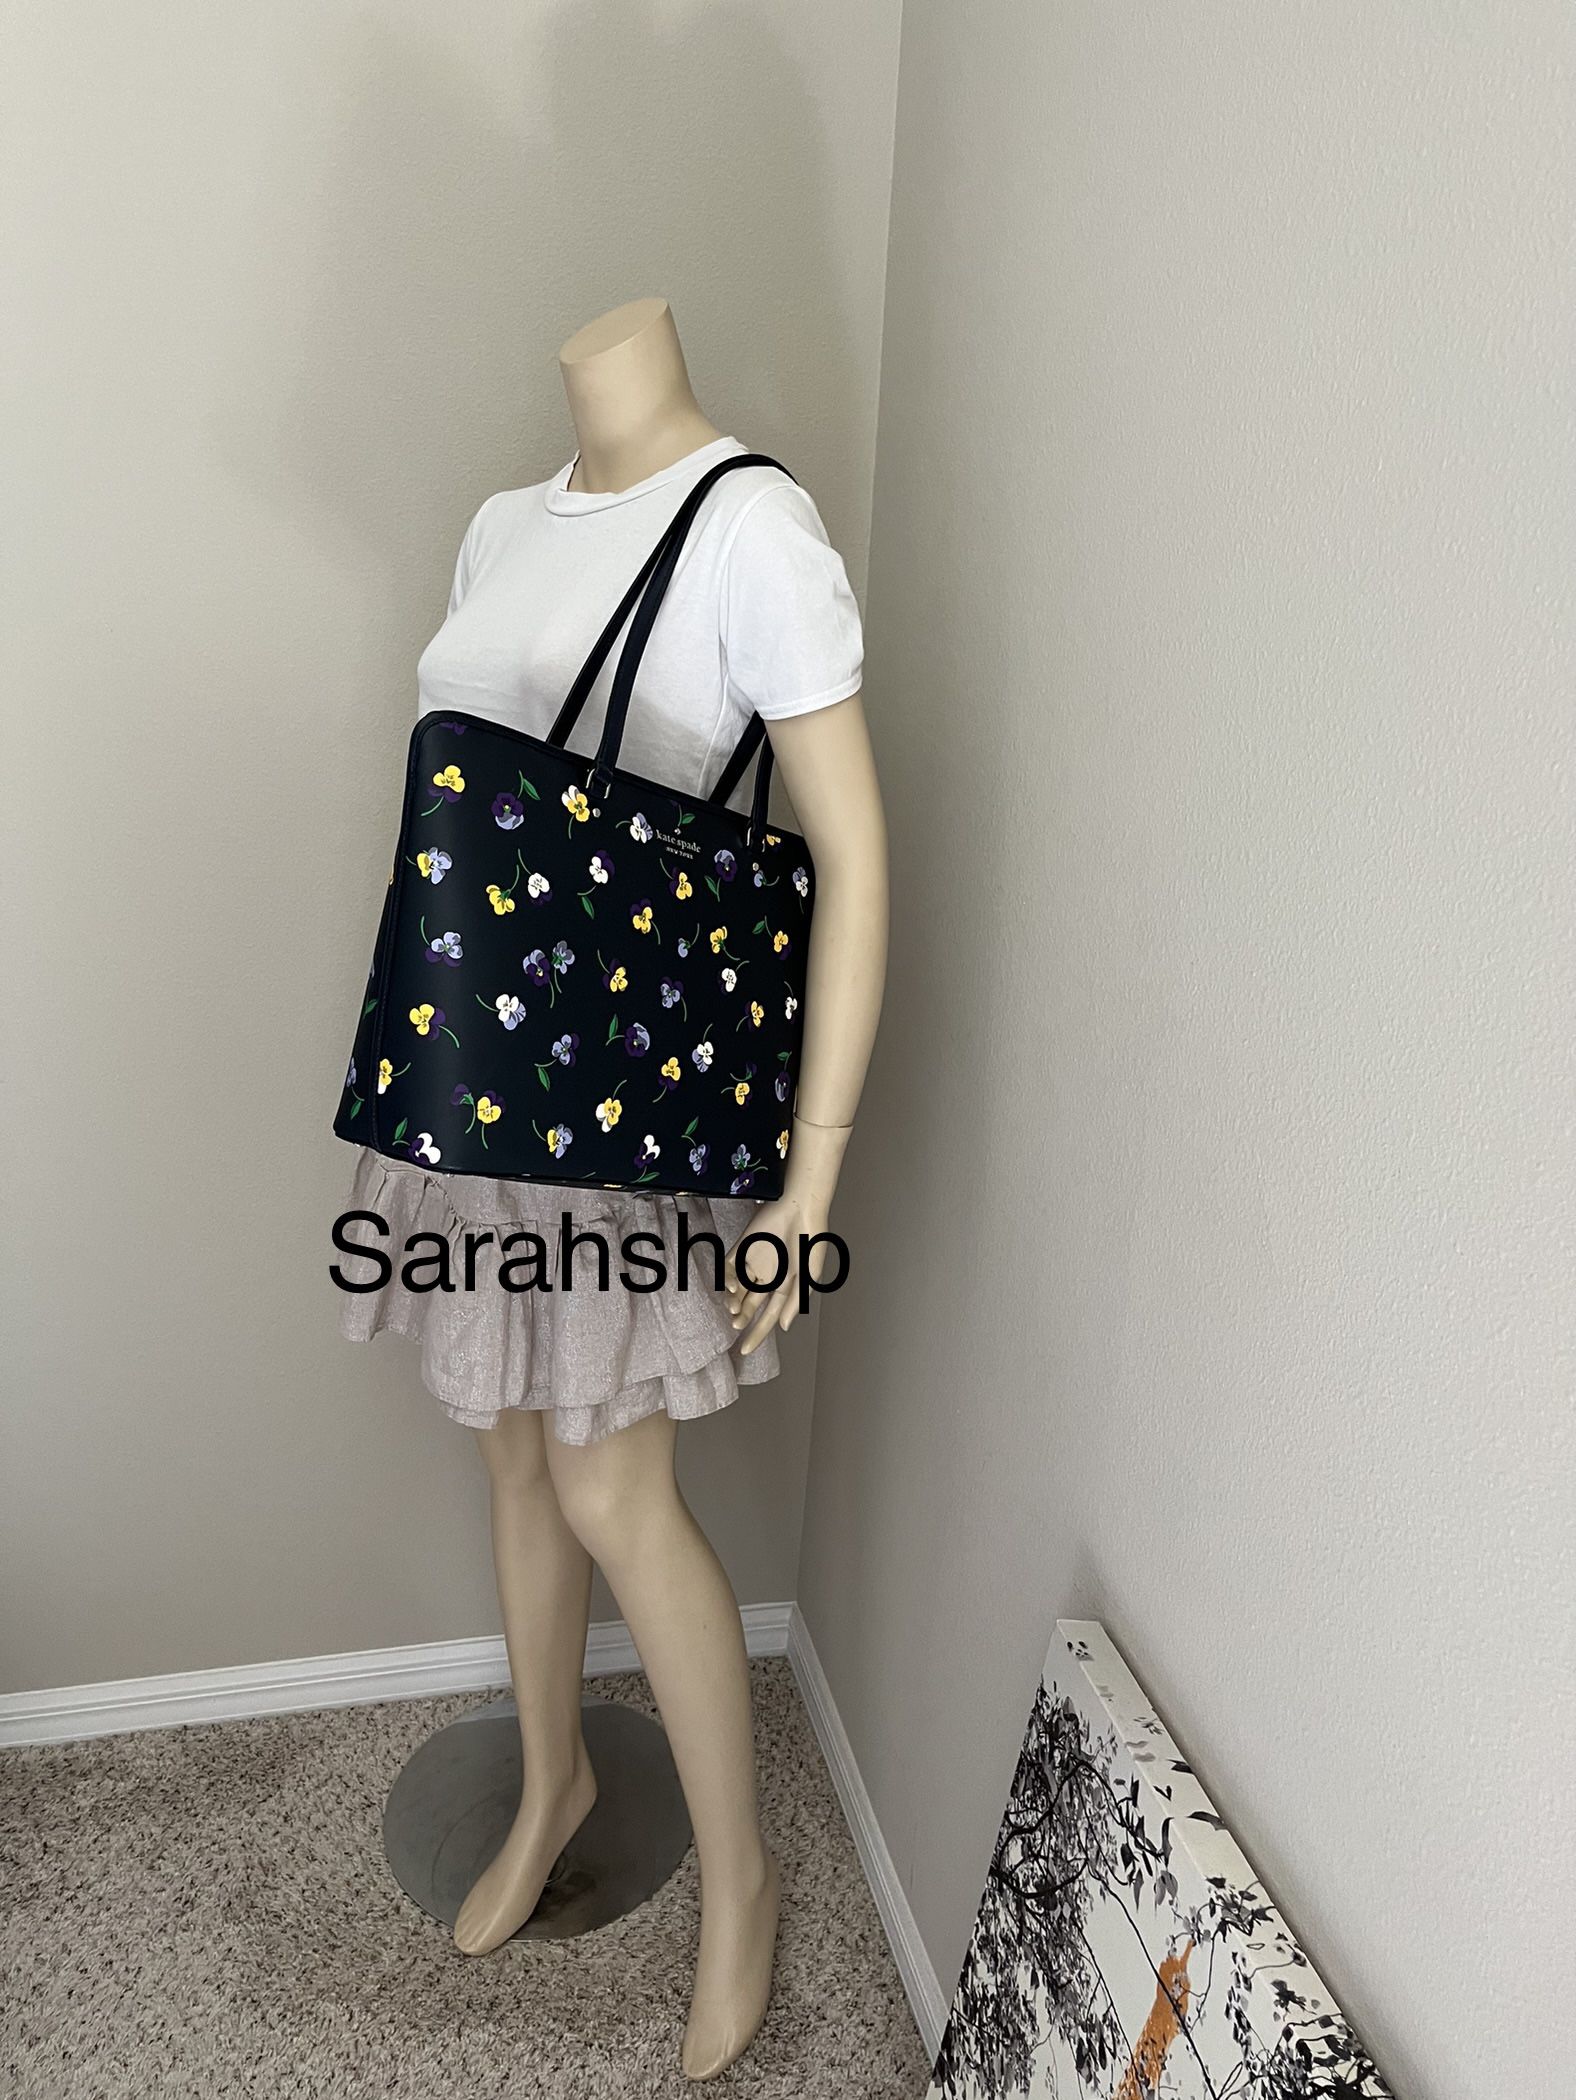 Kate Spade Yellow Crossbody Bag for Sale in Tampa, FL - OfferUp